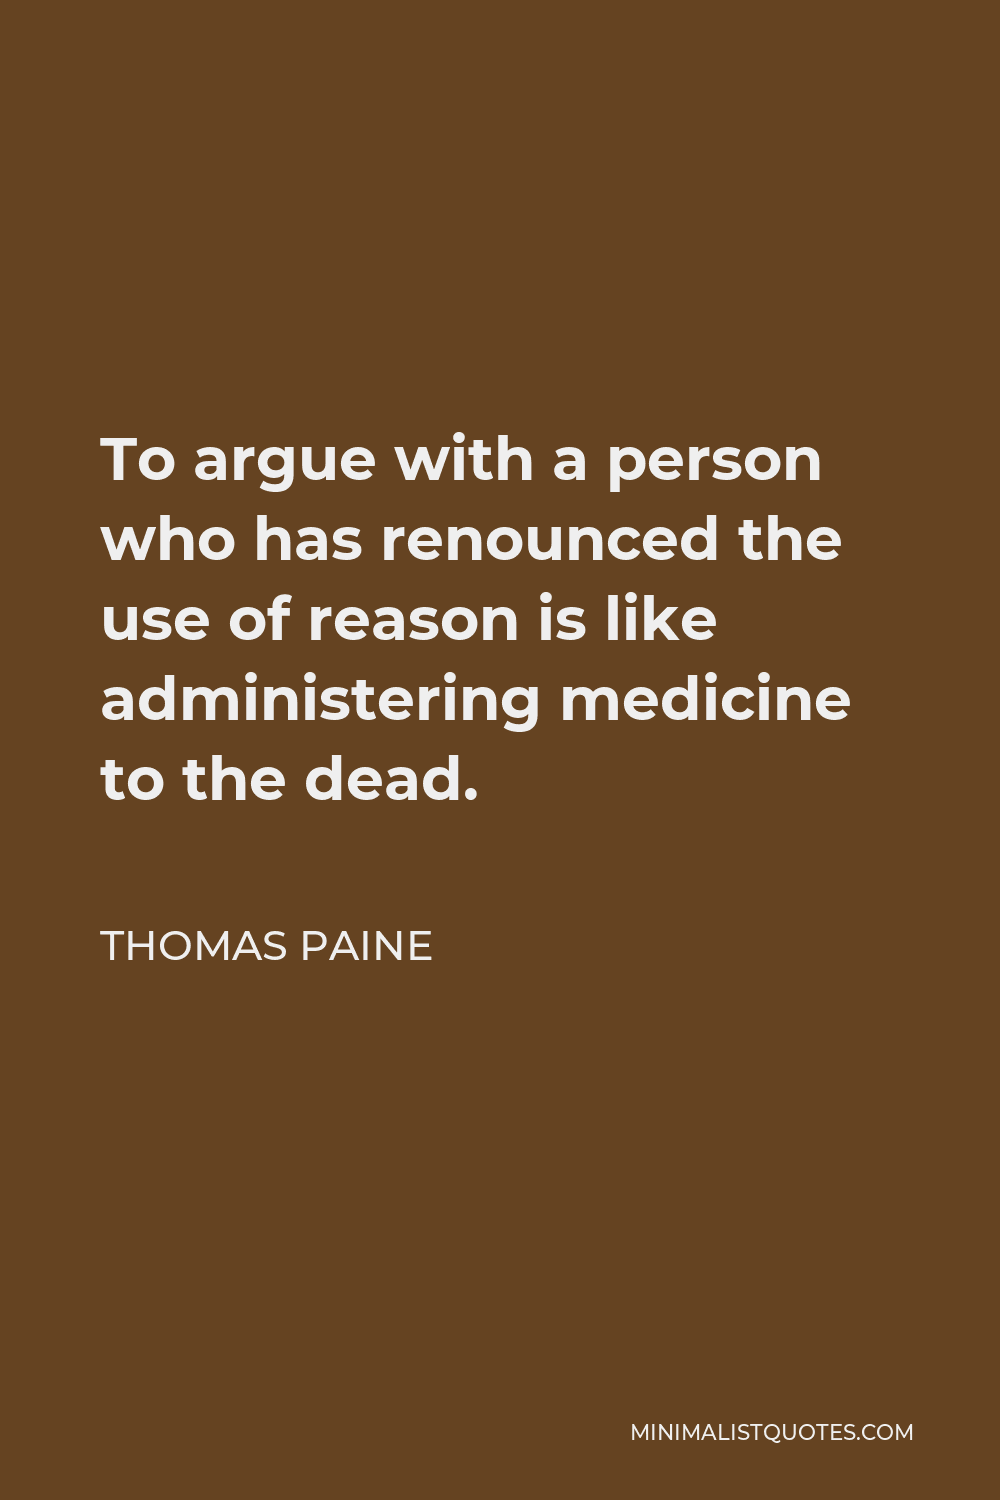 Thomas Paine Quote: To argue with a person who has renounced the ...